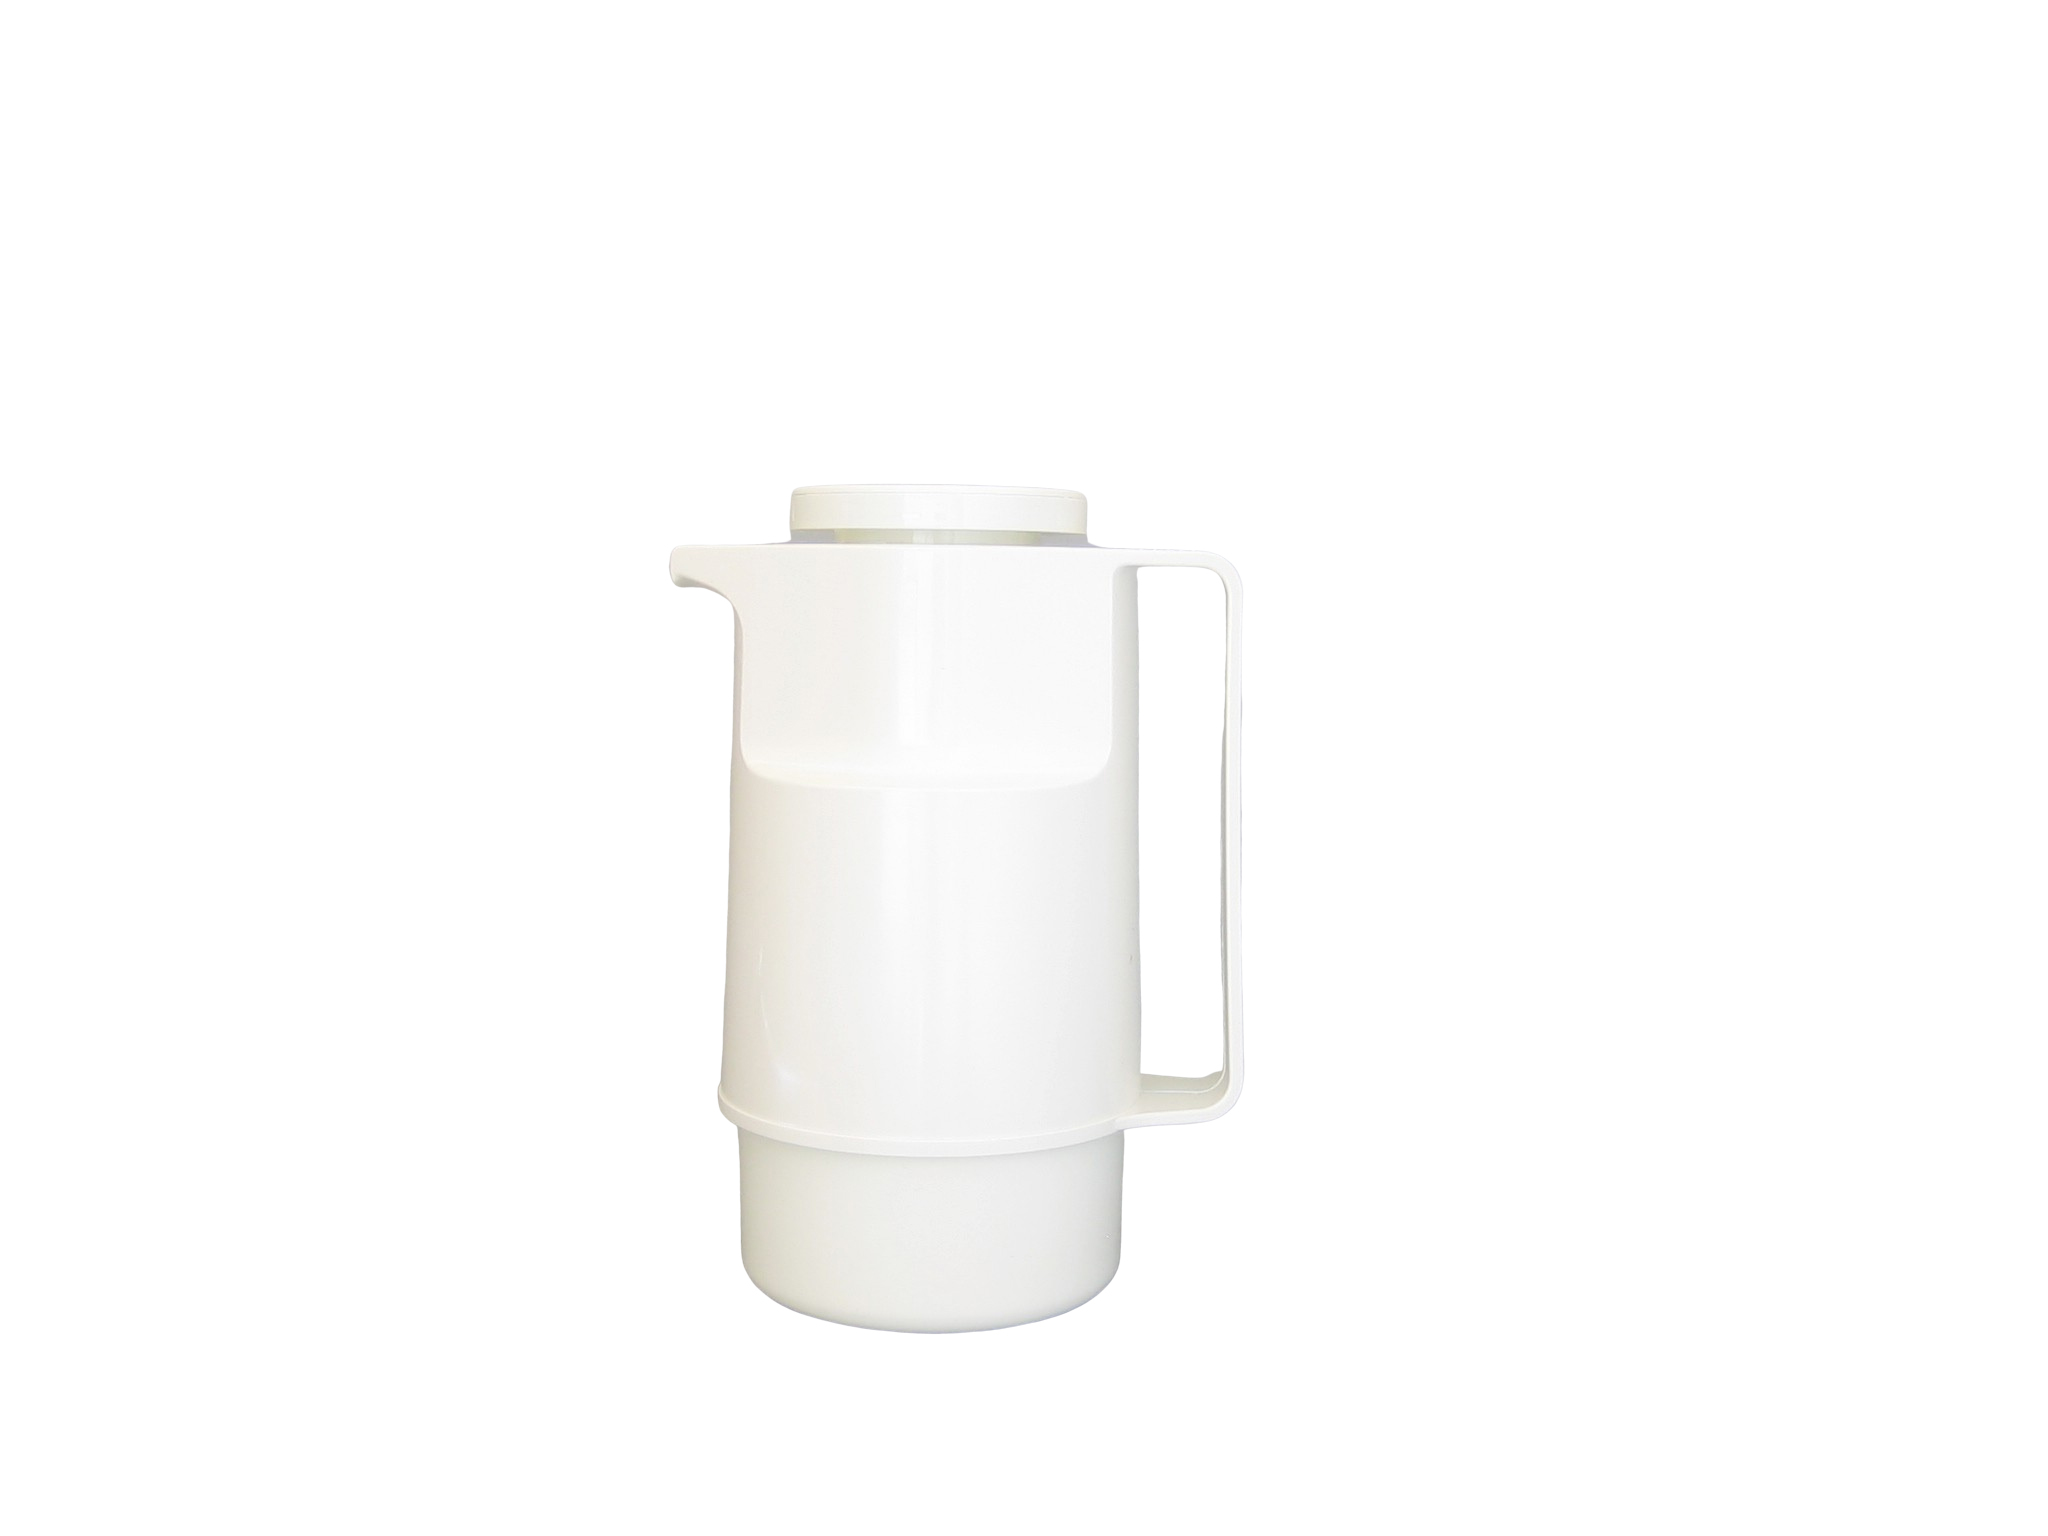 206-001 - Pichet isotherme ABS  blanc 0.60 L - Isobel